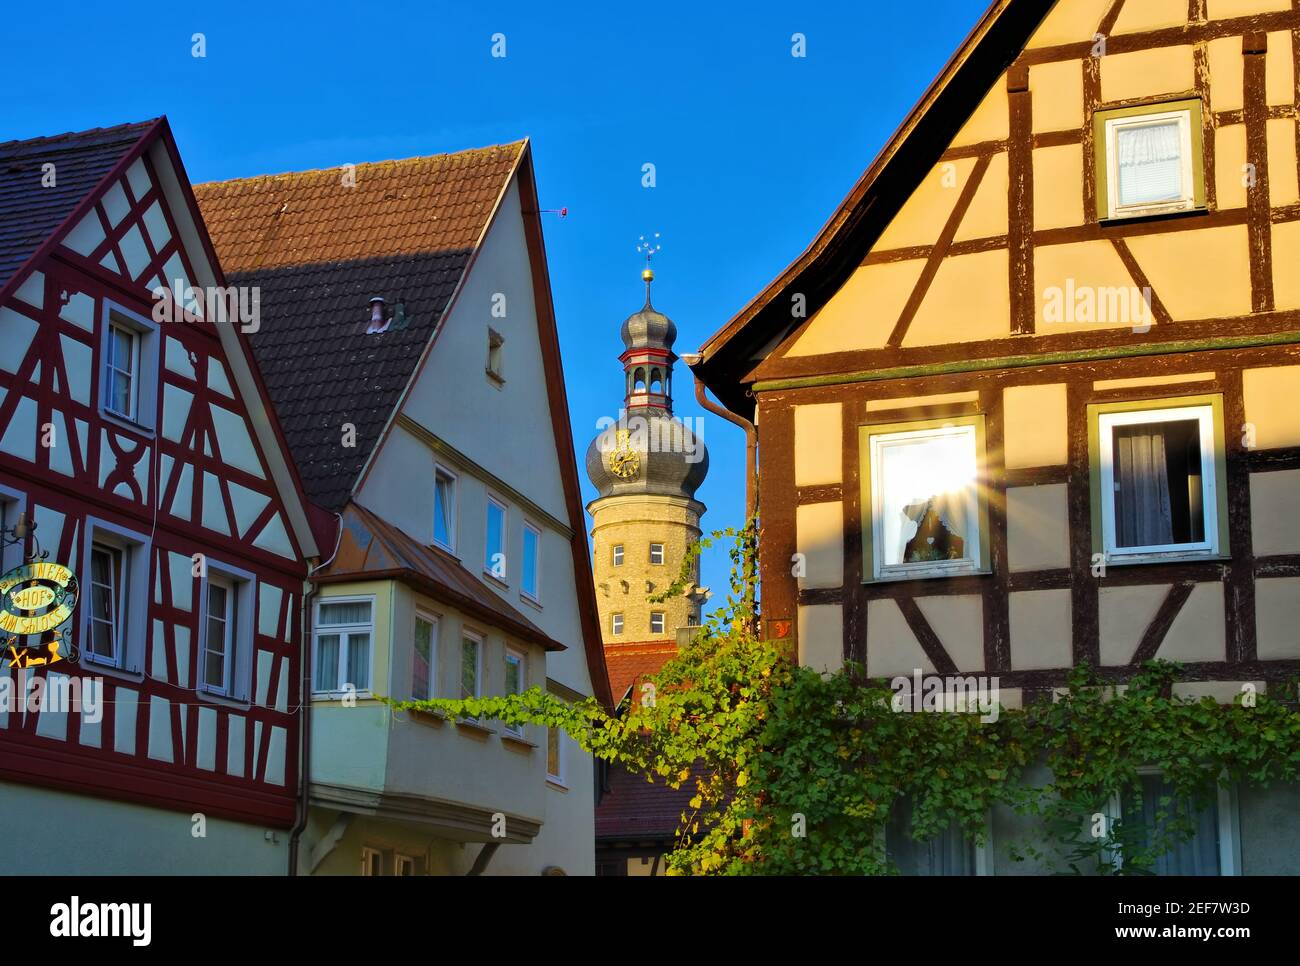 Castle tower in the town Weikersheim, Germany Stock Photo